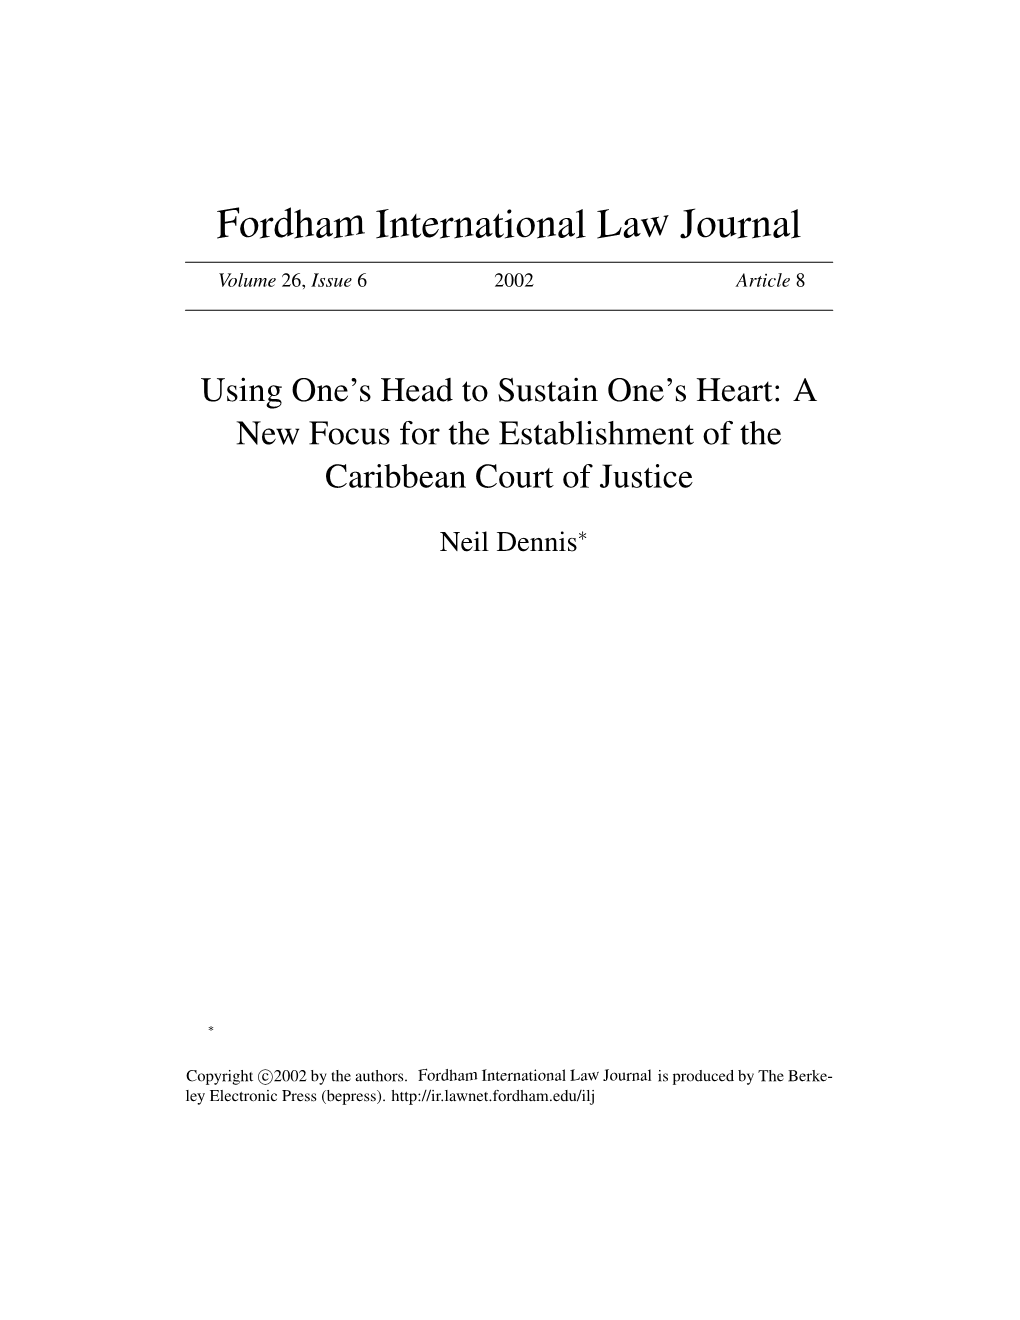 Using One's Head to Sustain One's Heart: a New Focus for the Establishment of the Caribbean Court of Justice